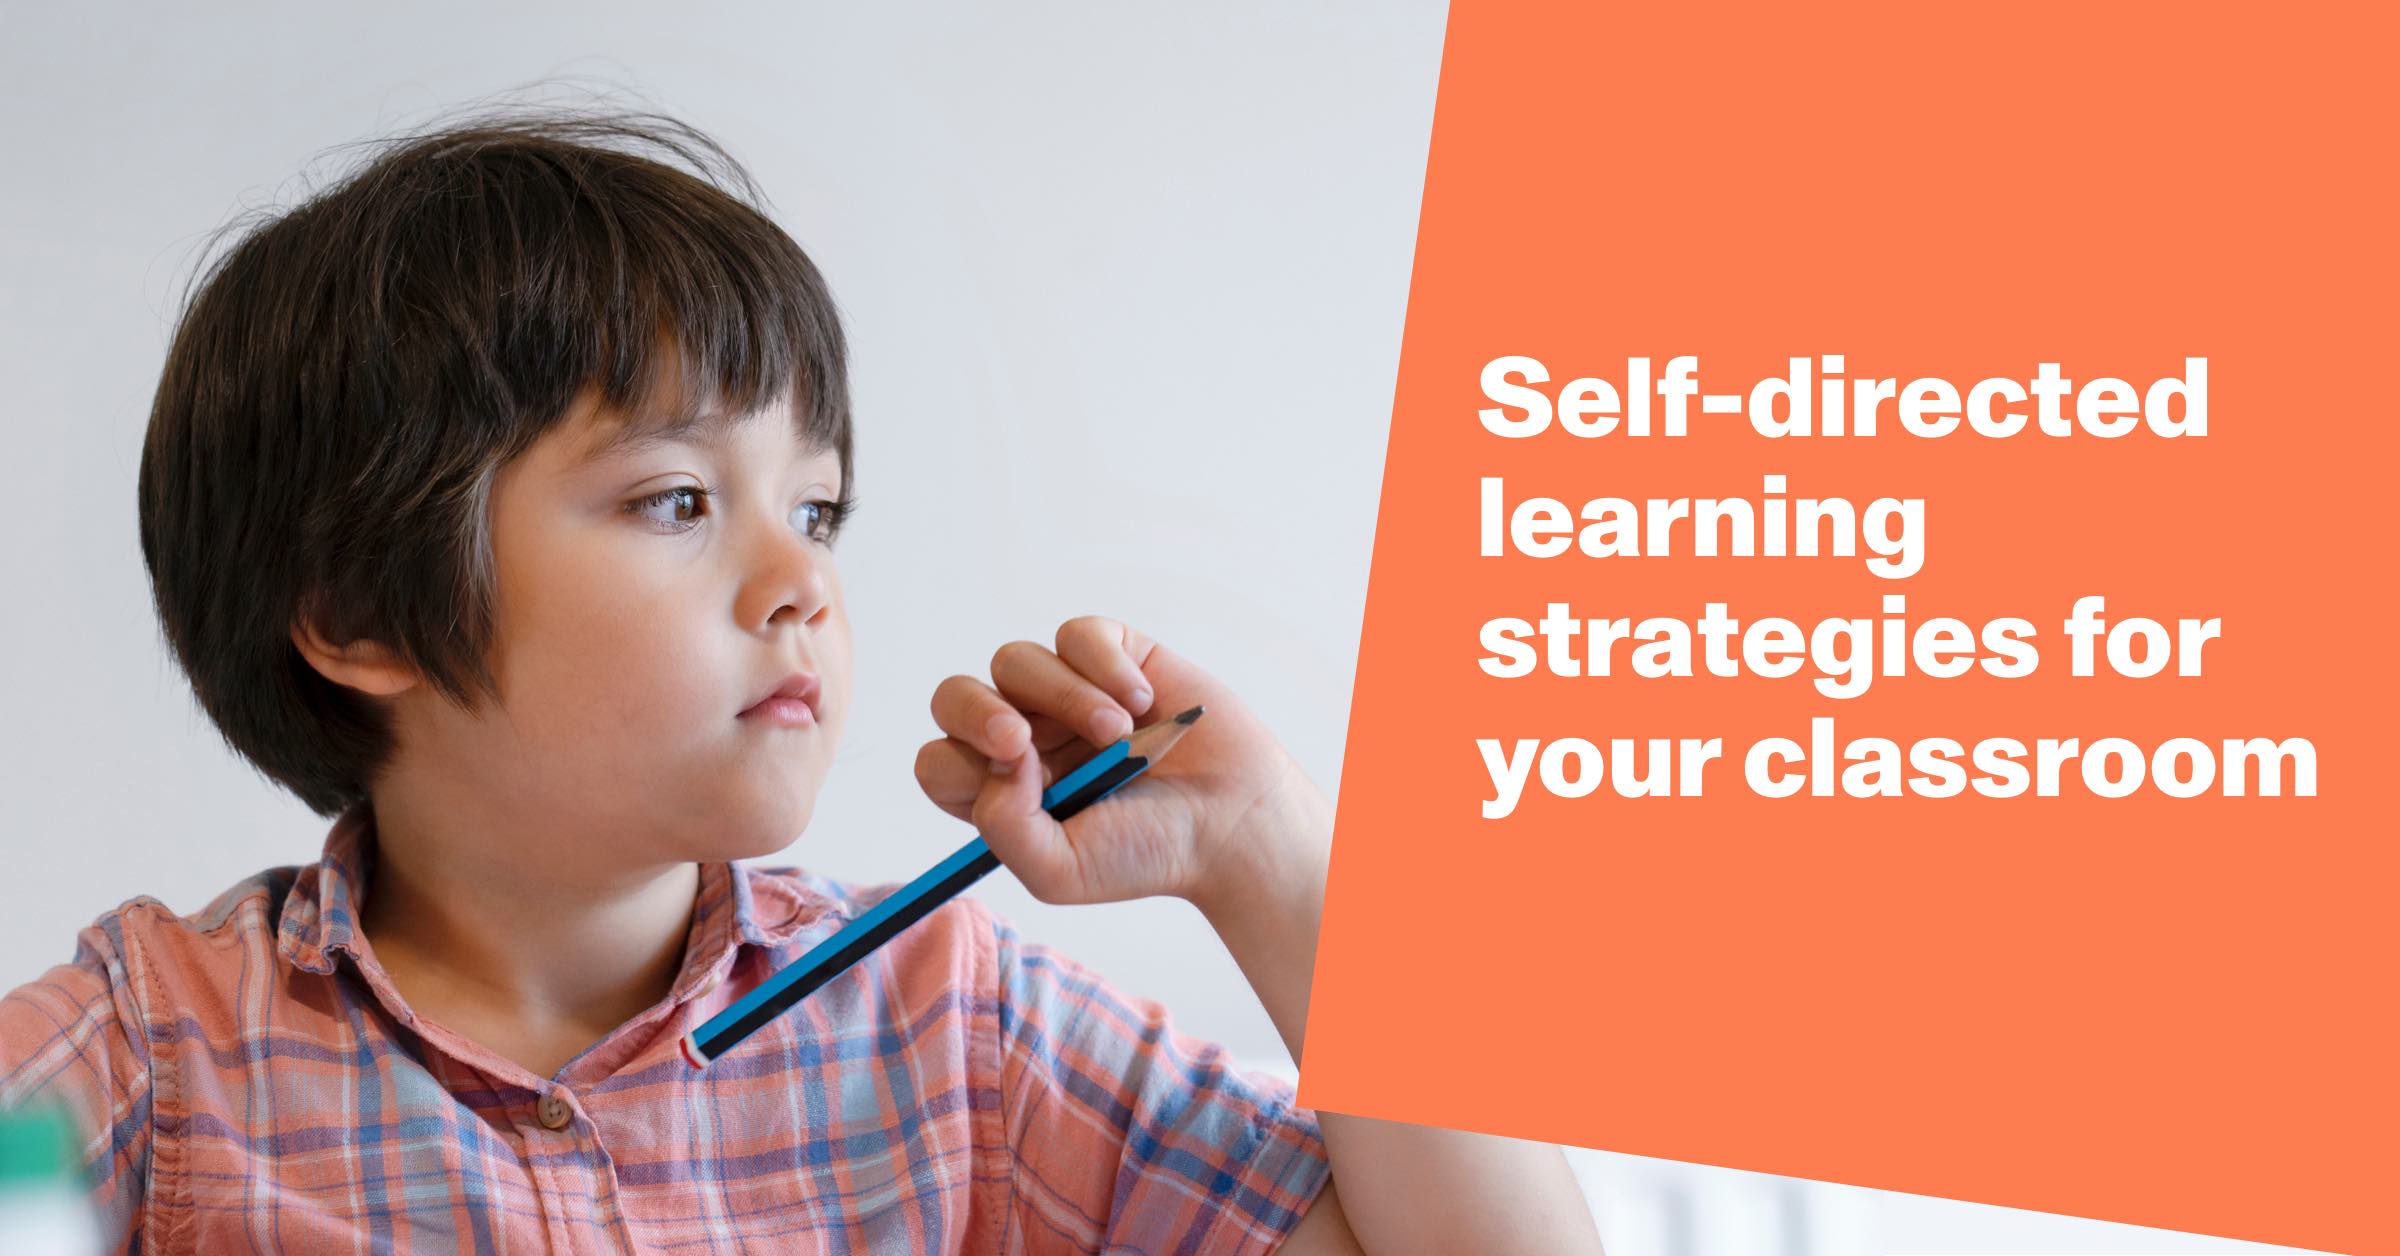 Self-directed learning strategies for your classroom